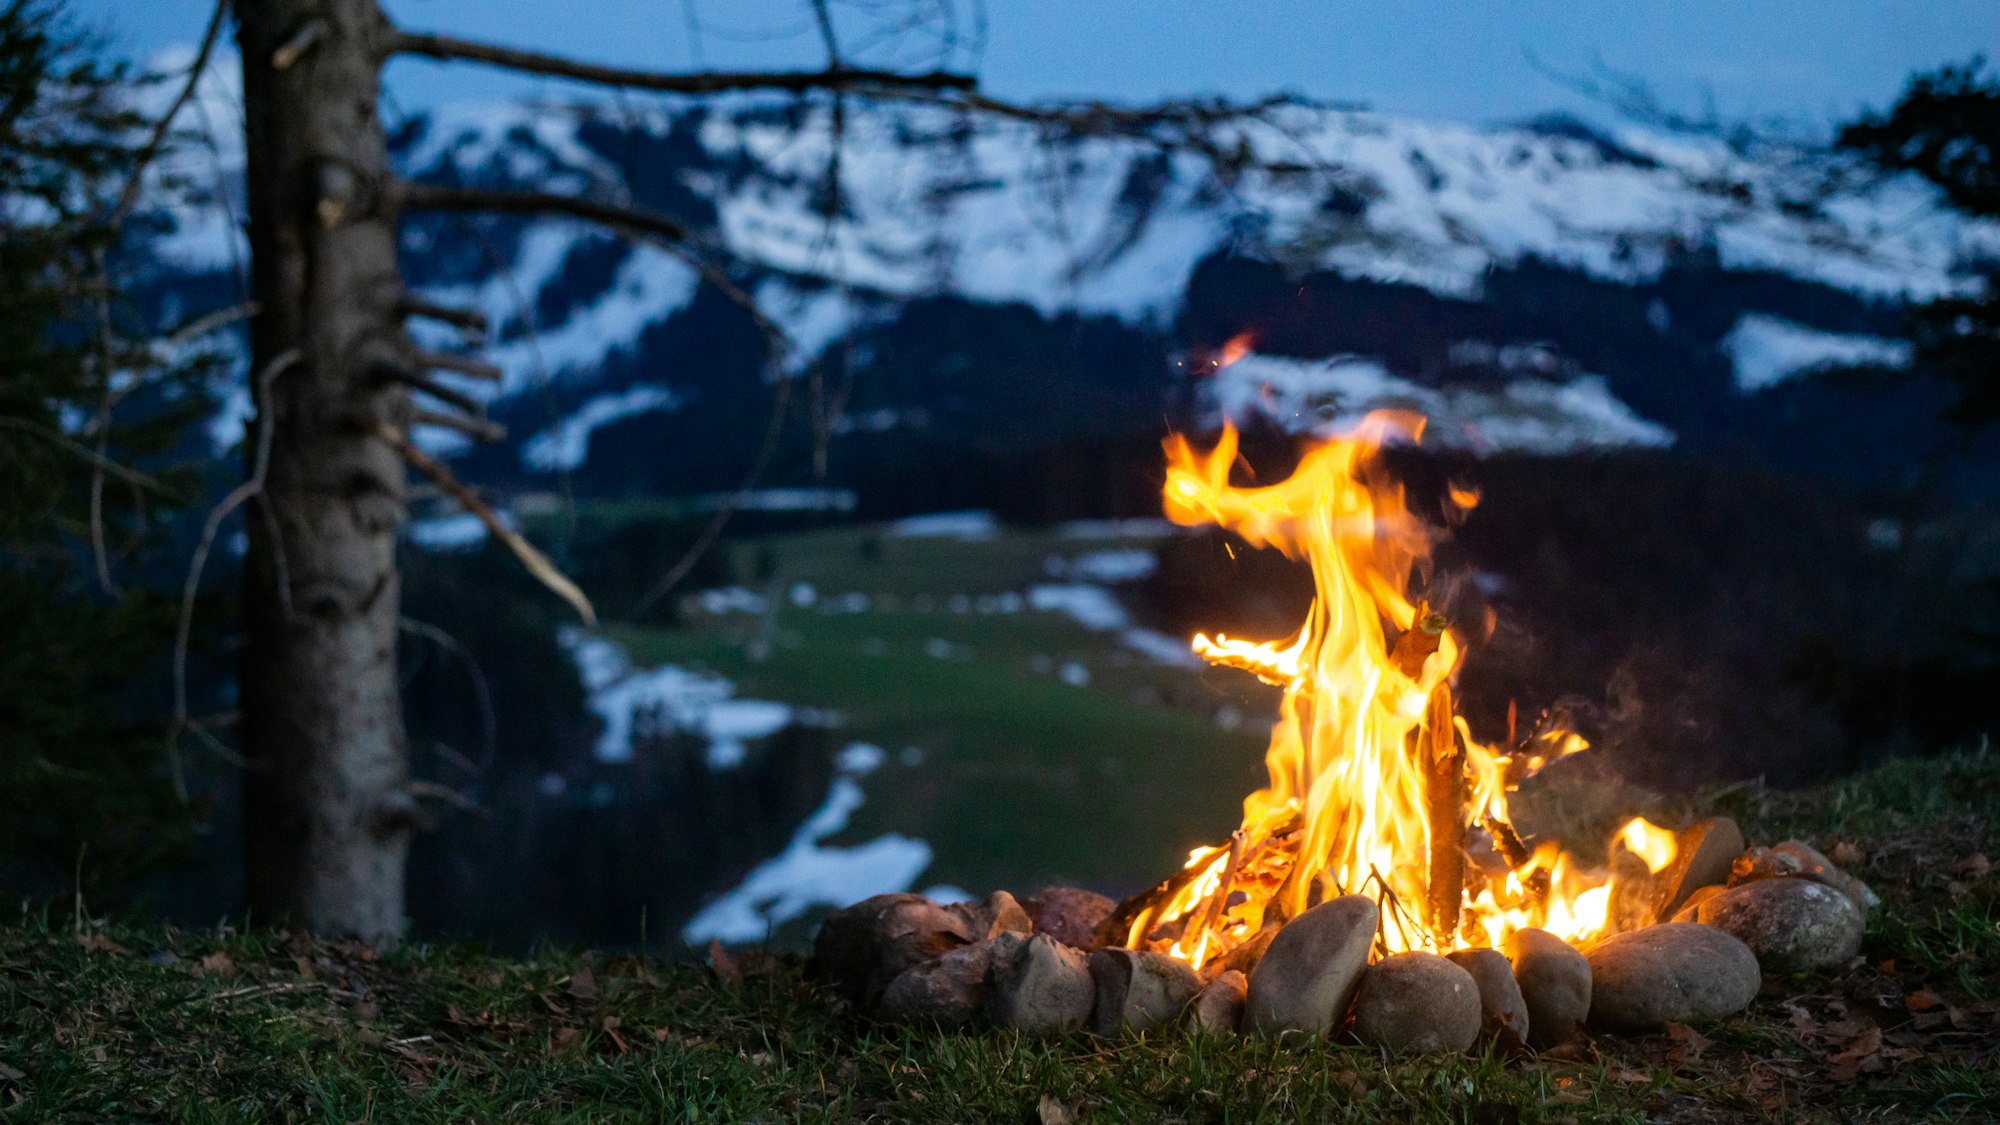 Fireplace in the evening. In the swiss mountains